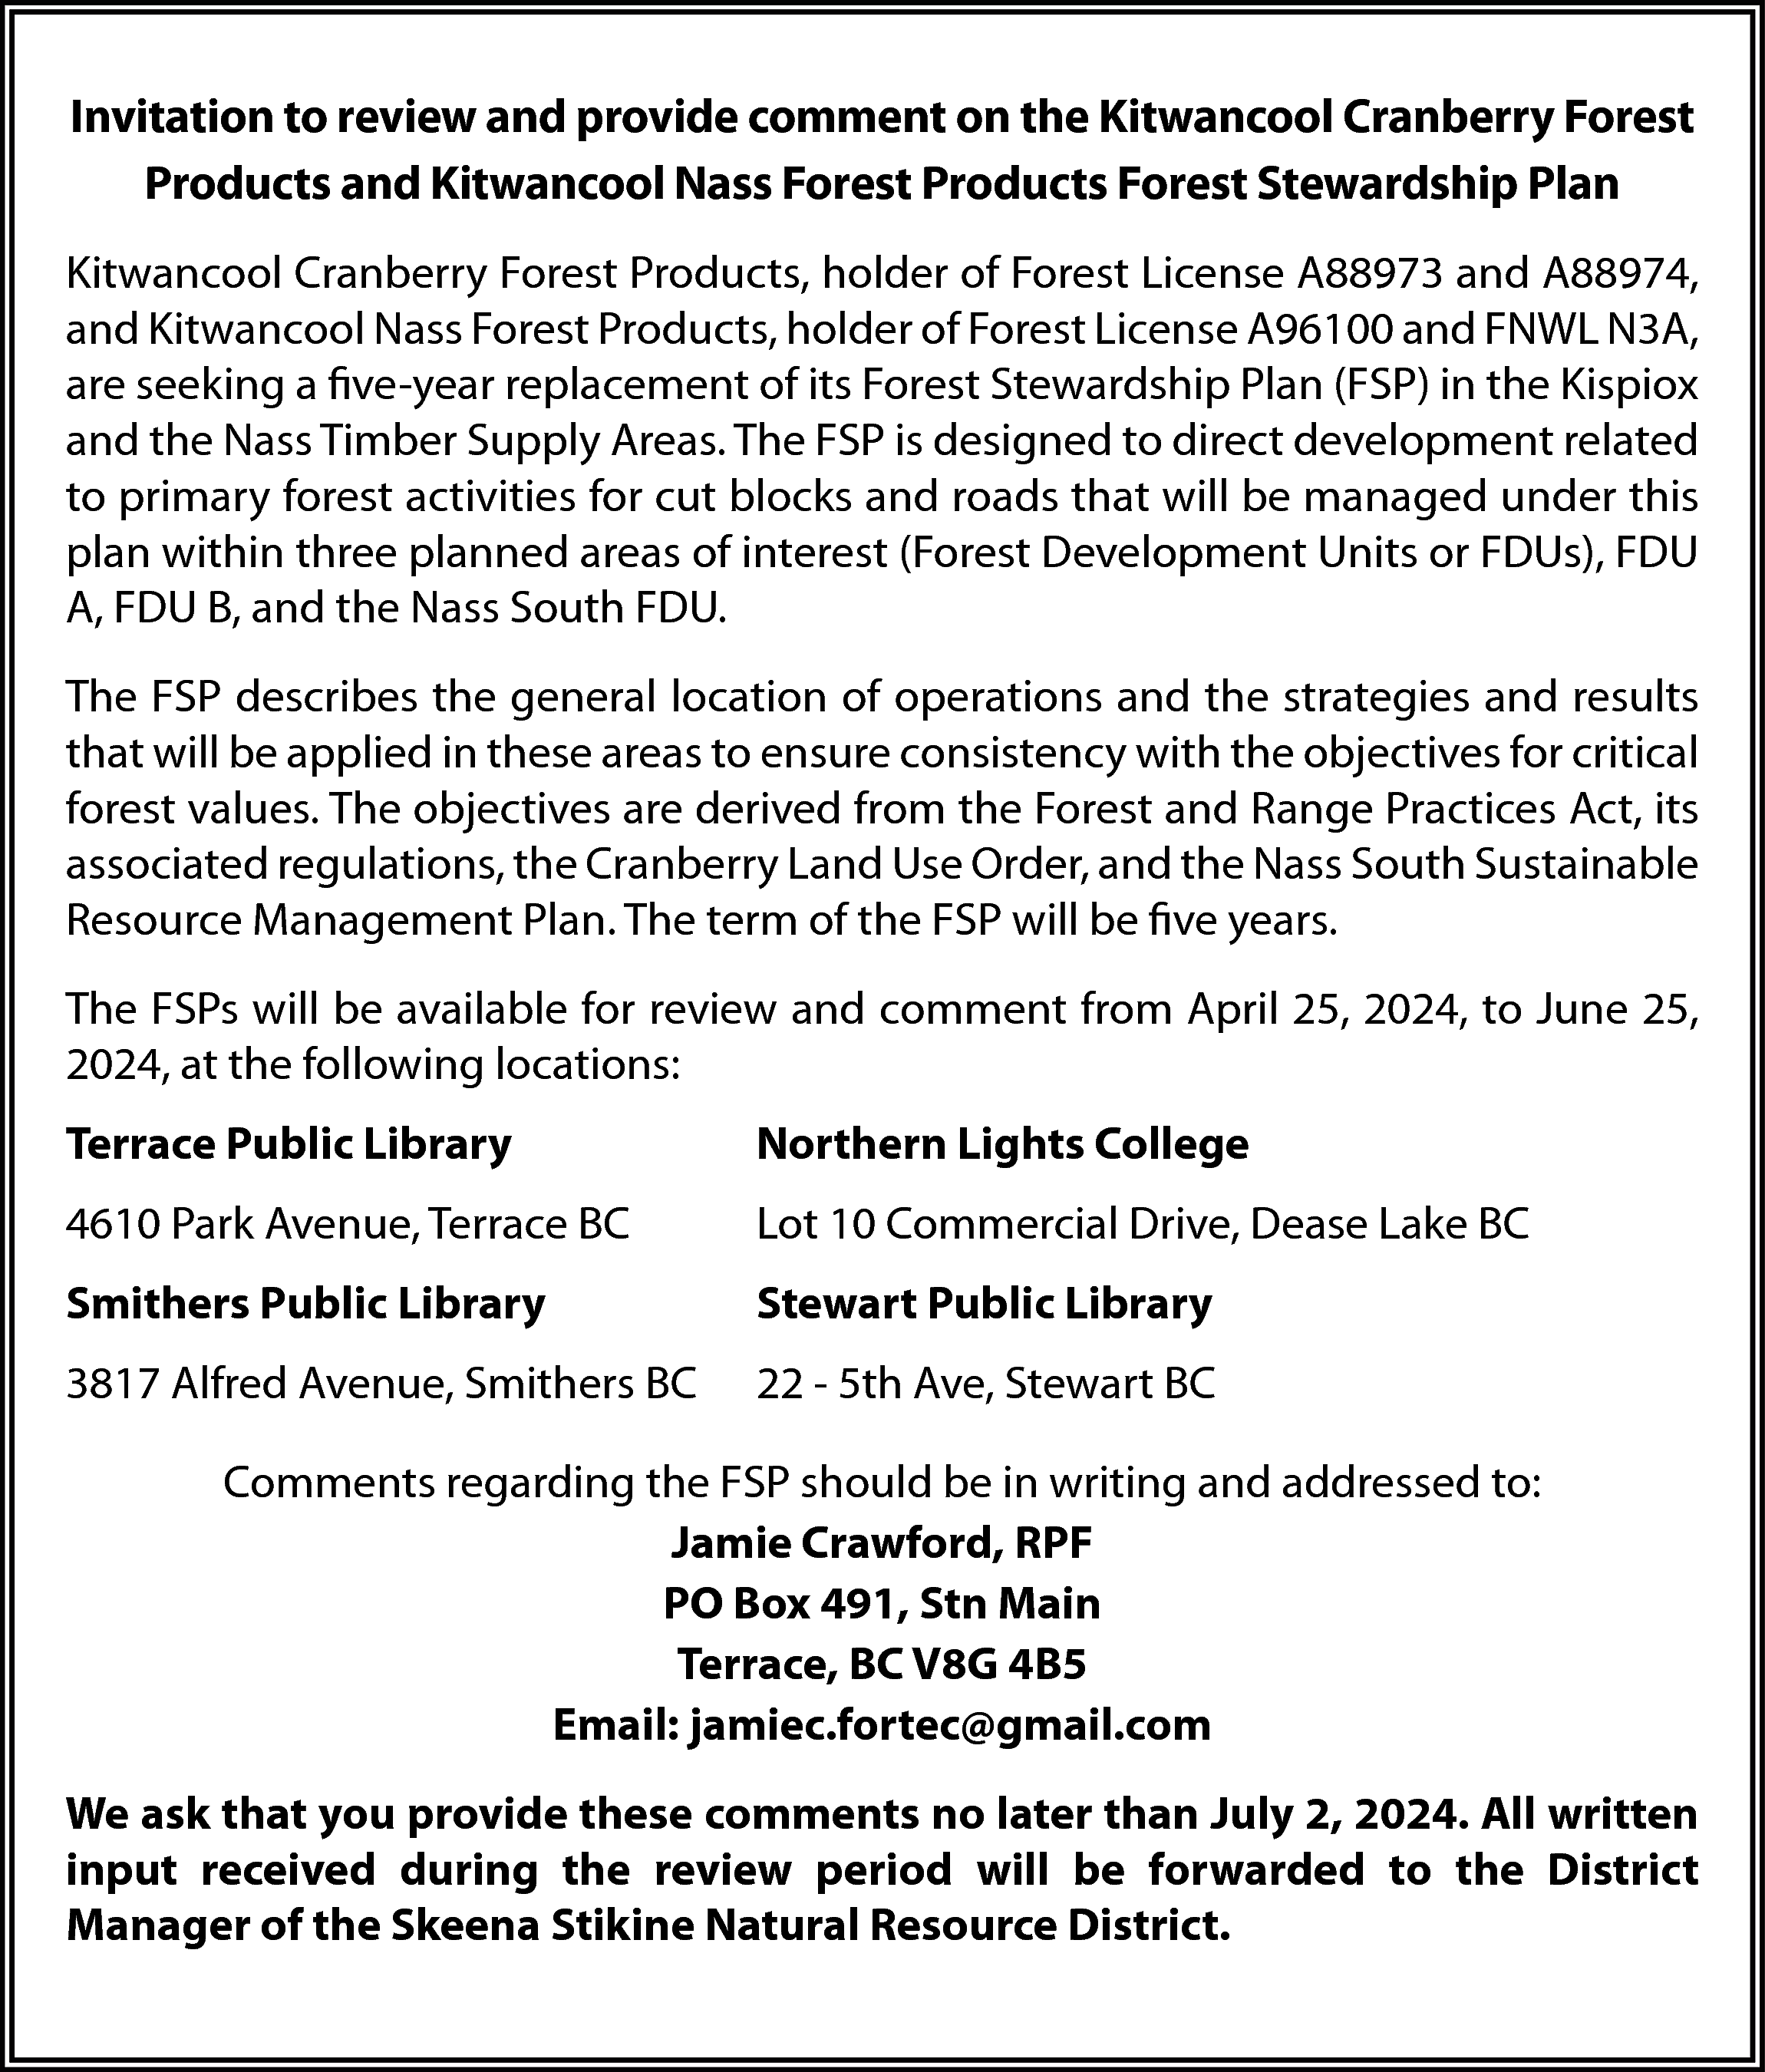 Invitation to review and provide  Invitation to review and provide comment on the Kitwancool Cranberry Forest  Products and Kitwancool Nass Forest Products Forest Stewardship Plan  Kitwancool Cranberry Forest Products, holder of Forest License A88973 and A88974,  and Kitwancool Nass Forest Products, holder of Forest License A96100 and FNWL N3A,  are seeking a five-year replacement of its Forest Stewardship Plan (FSP) in the Kispiox  and the Nass Timber Supply Areas. The FSP is designed to direct development related  to primary forest activities for cut blocks and roads that will be managed under this  plan within three planned areas of interest (Forest Development Units or FDUs), FDU  A, FDU B, and the Nass South FDU.  The FSP describes the general location of operations and the strategies and results  that will be applied in these areas to ensure consistency with the objectives for critical  forest values. The objectives are derived from the Forest and Range Practices Act, its  associated regulations, the Cranberry Land Use Order, and the Nass South Sustainable  Resource Management Plan. The term of the FSP will be five years.  The FSPs will be available for review and comment from April 25, 2024, to June 25,  2024, at the following locations:  Terrace Public Library    Northern Lights College    4610 Park Avenue, Terrace BC    Lot 10 Commercial Drive, Dease Lake BC    Smithers Public Library    Stewart Public Library    3817 Alfred Avenue, Smithers BC    22 - 5th Ave, Stewart BC    Comments regarding the FSP should be in writing and addressed to:  Jamie Crawford, RPF  PO Box 491, Stn Main  Terrace, BC V8G 4B5  Email: jamiec.fortec@gmail.com  We ask that you provide these comments no later than July 2, 2024. All written  input received during the review period will be forwarded to the District  Manager of the Skeena Stikine Natural Resource District.    